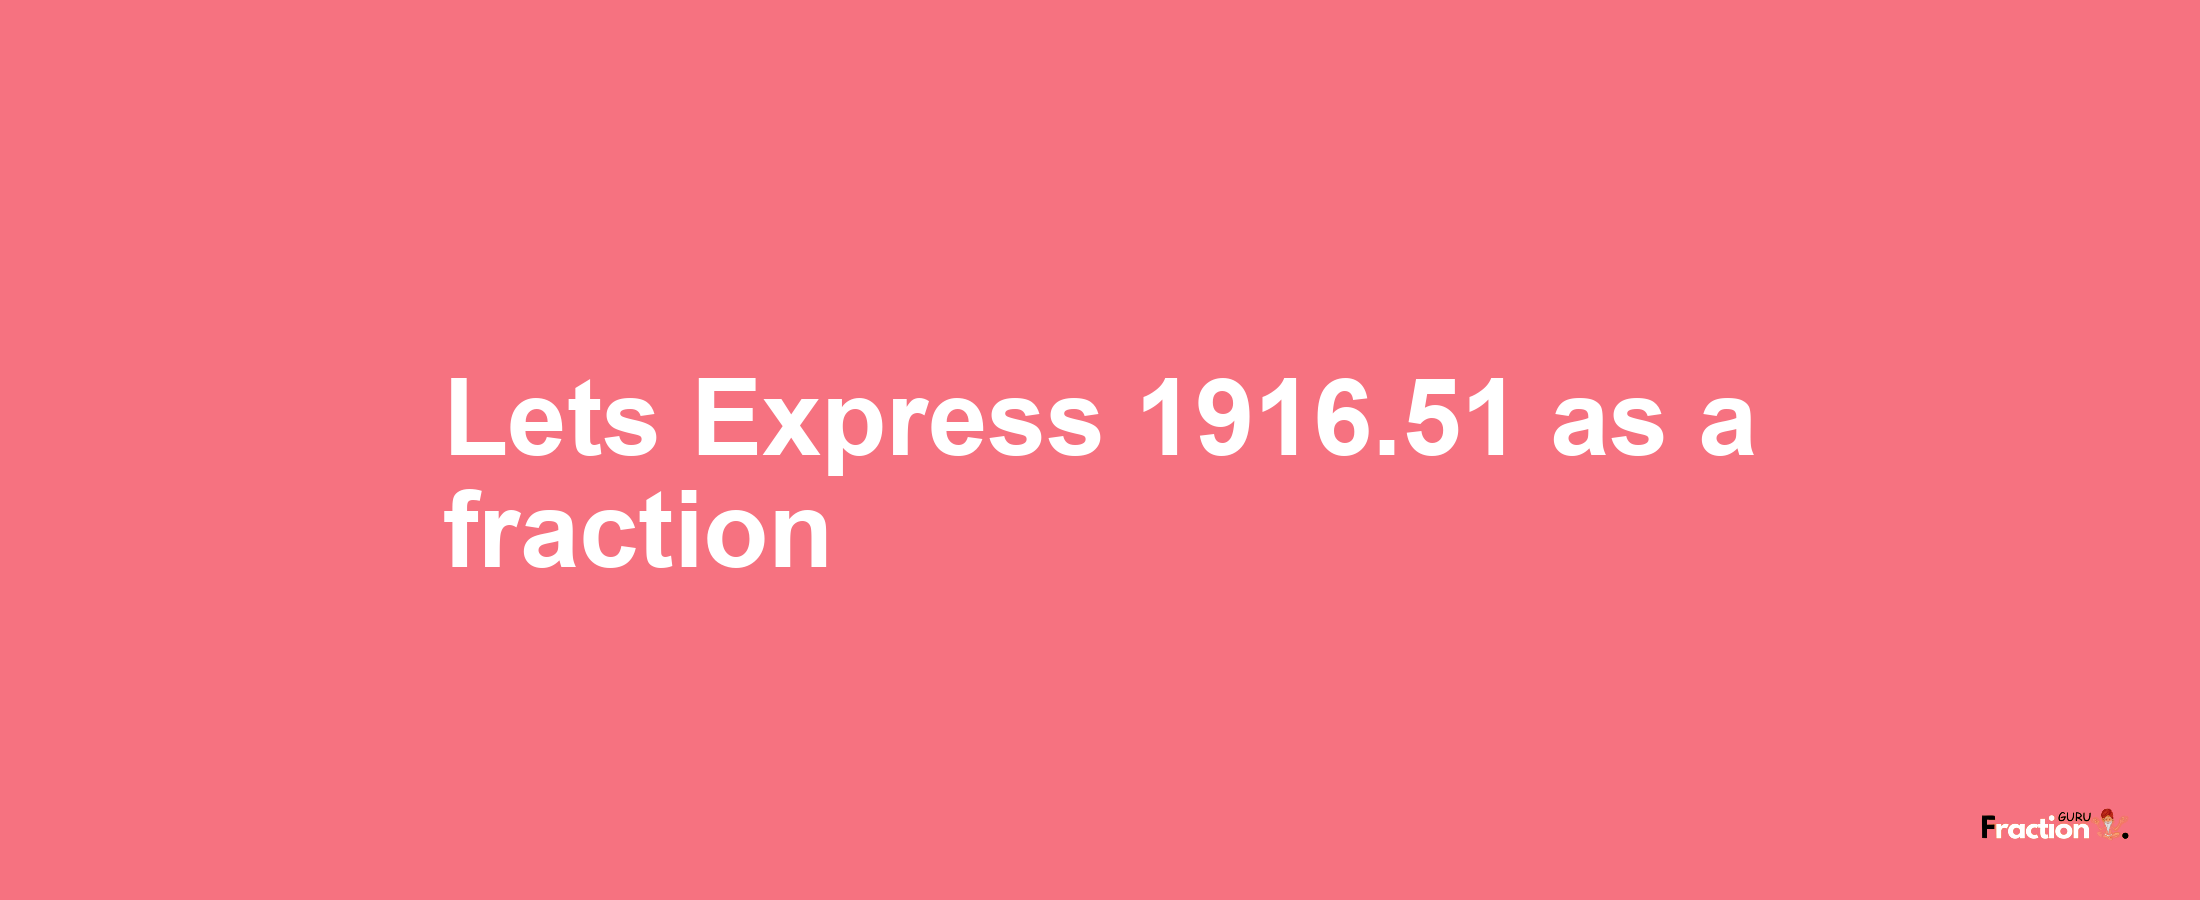 Lets Express 1916.51 as afraction